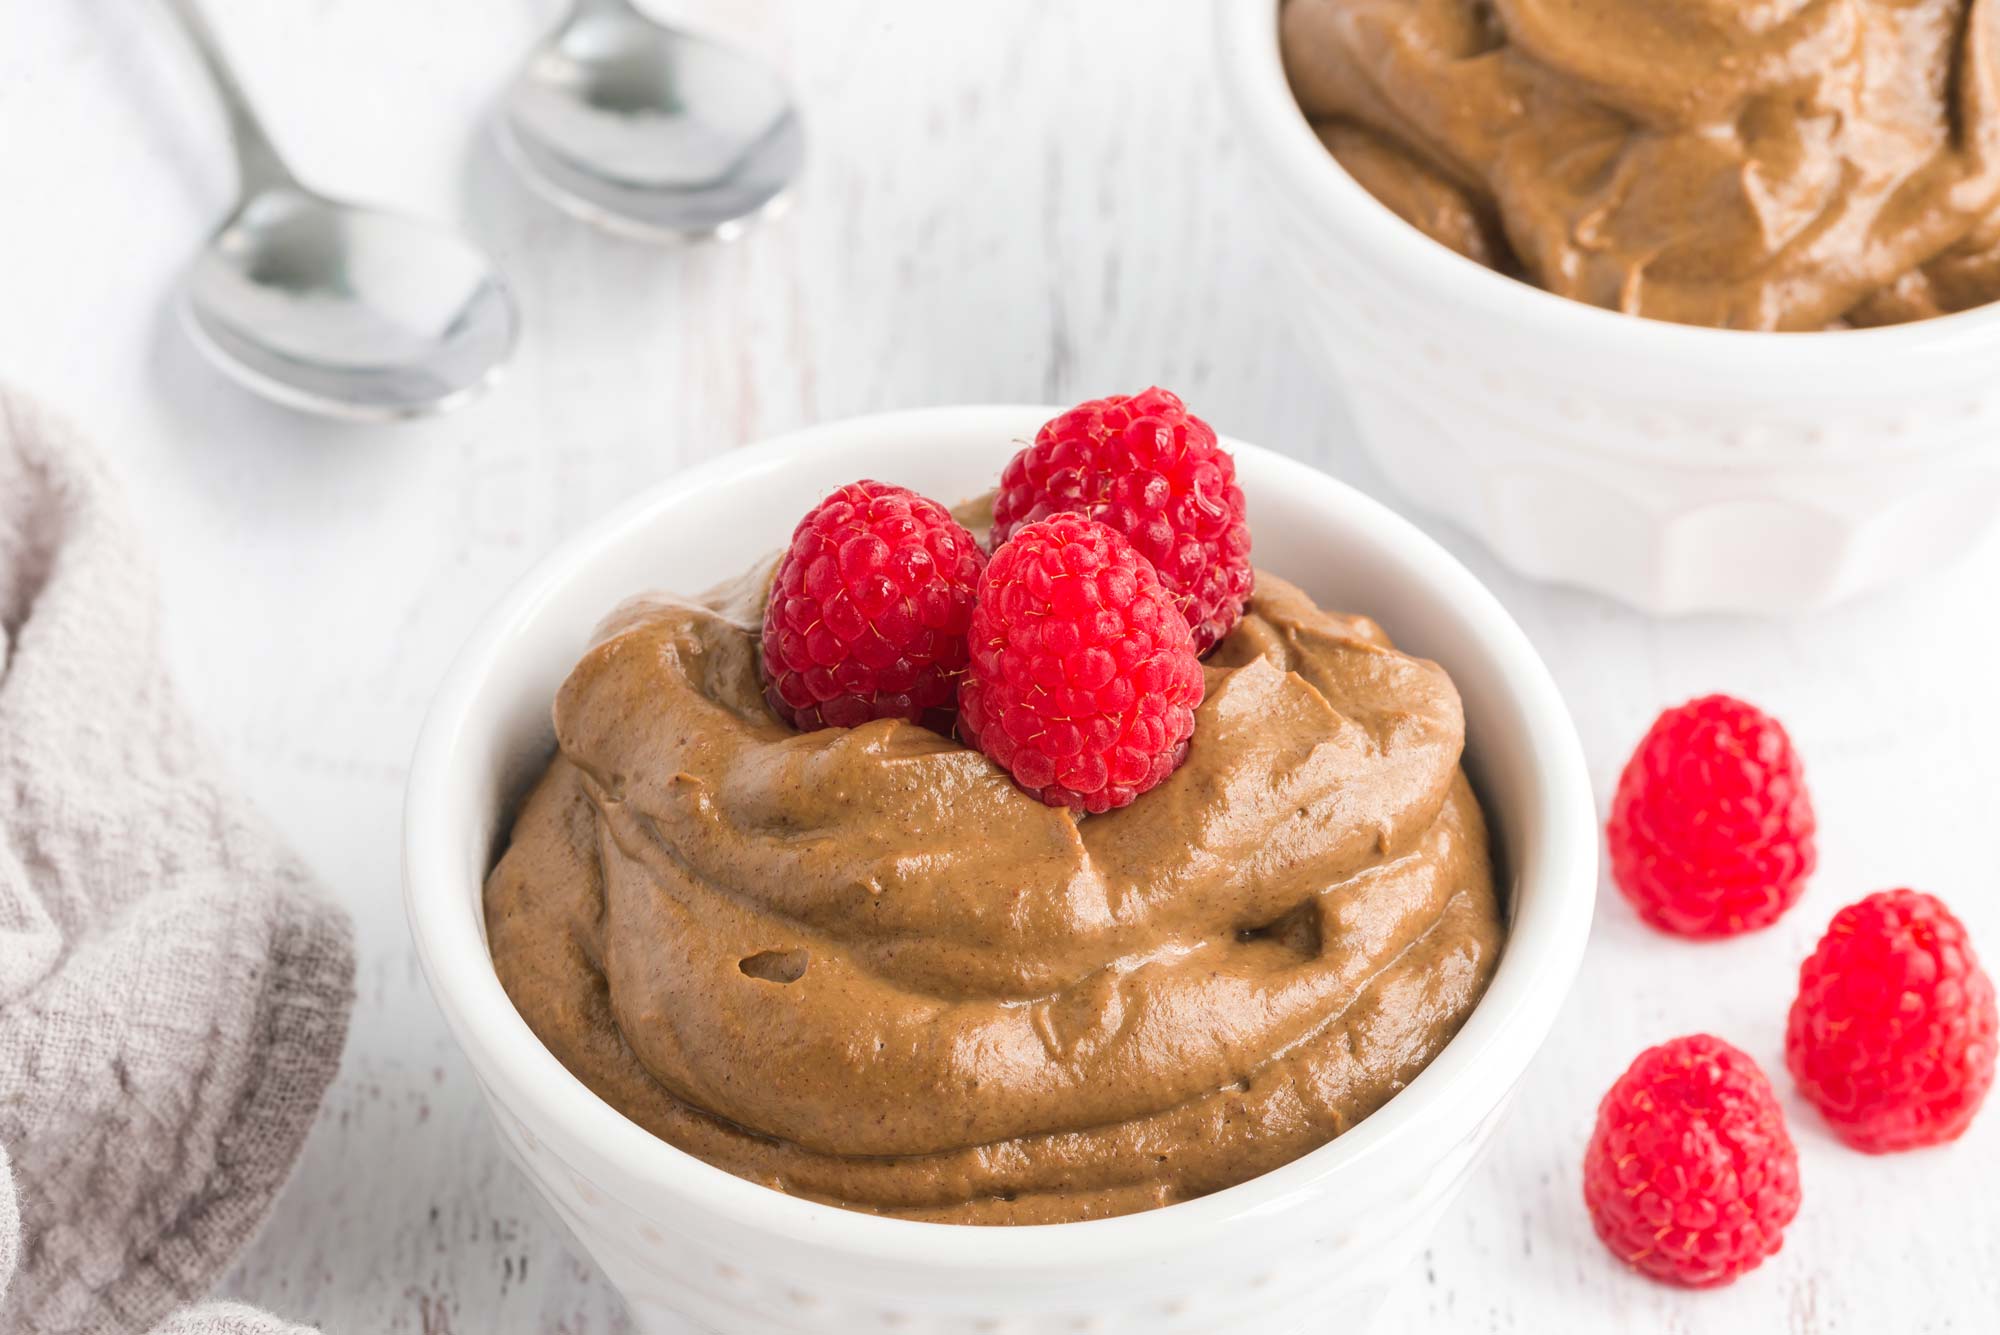 Chocolate almond butter mousse